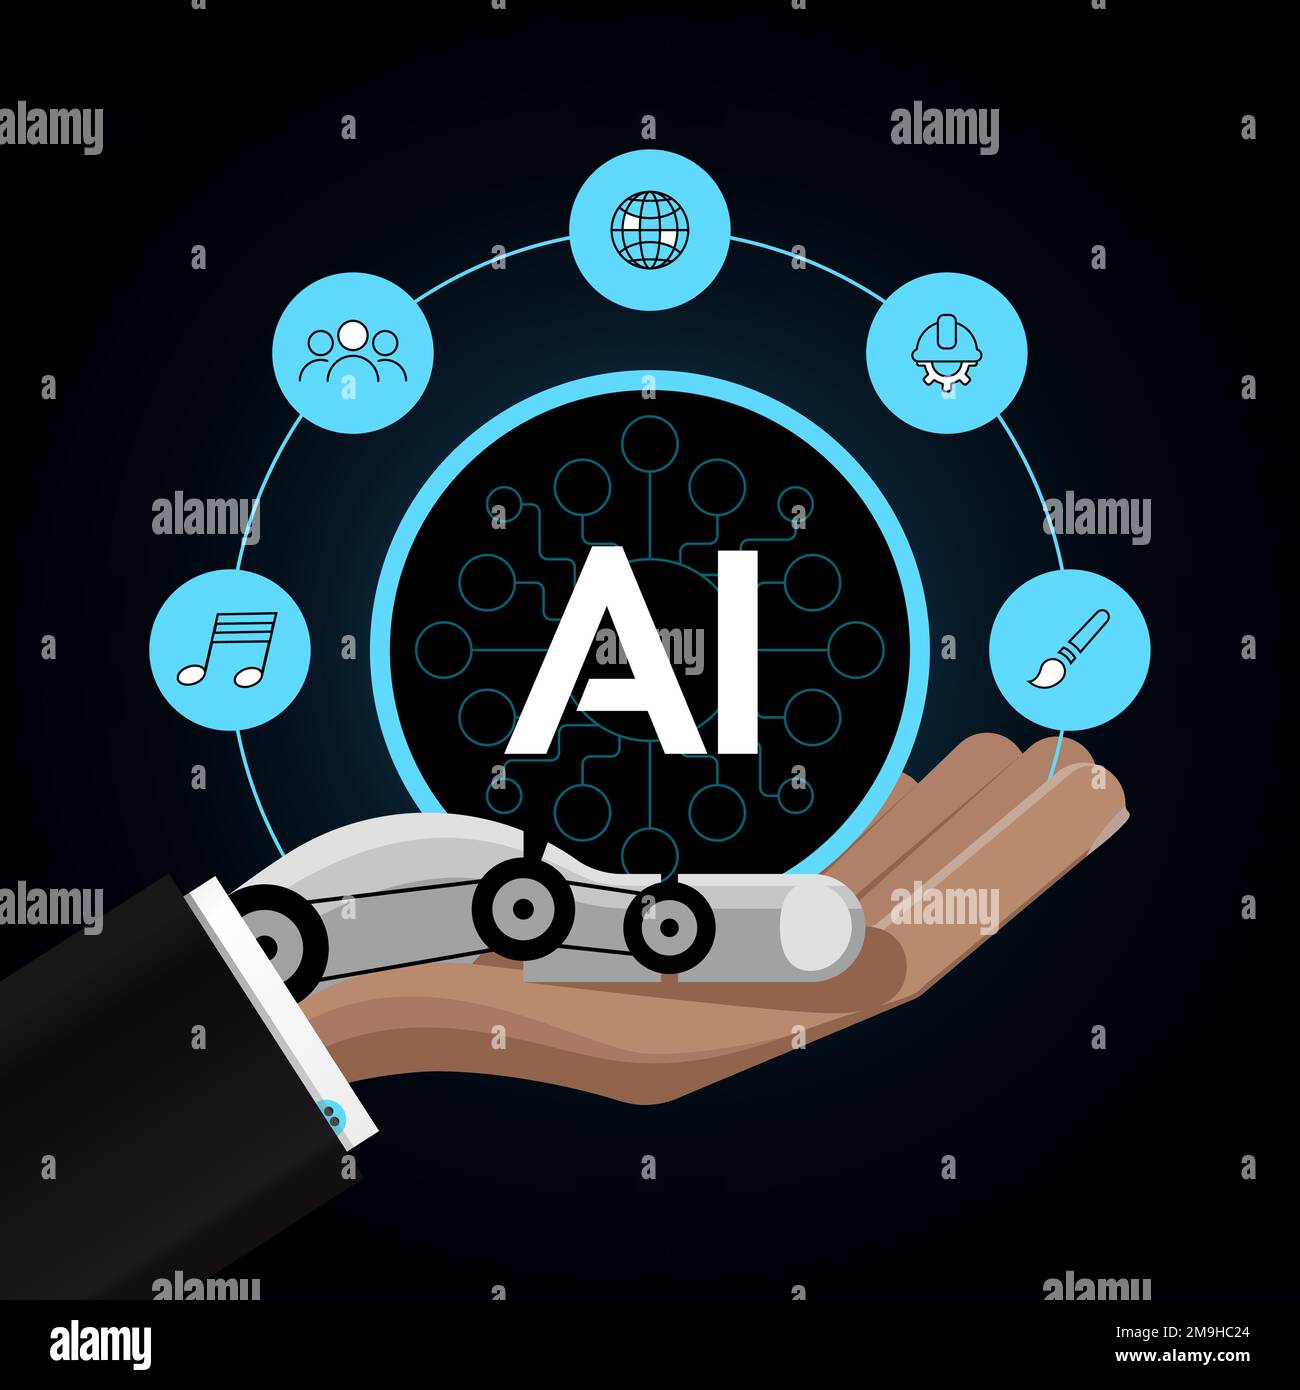 Artificial intelligence concept with 5 icons and semi robotic hand. Vector Stock Vector